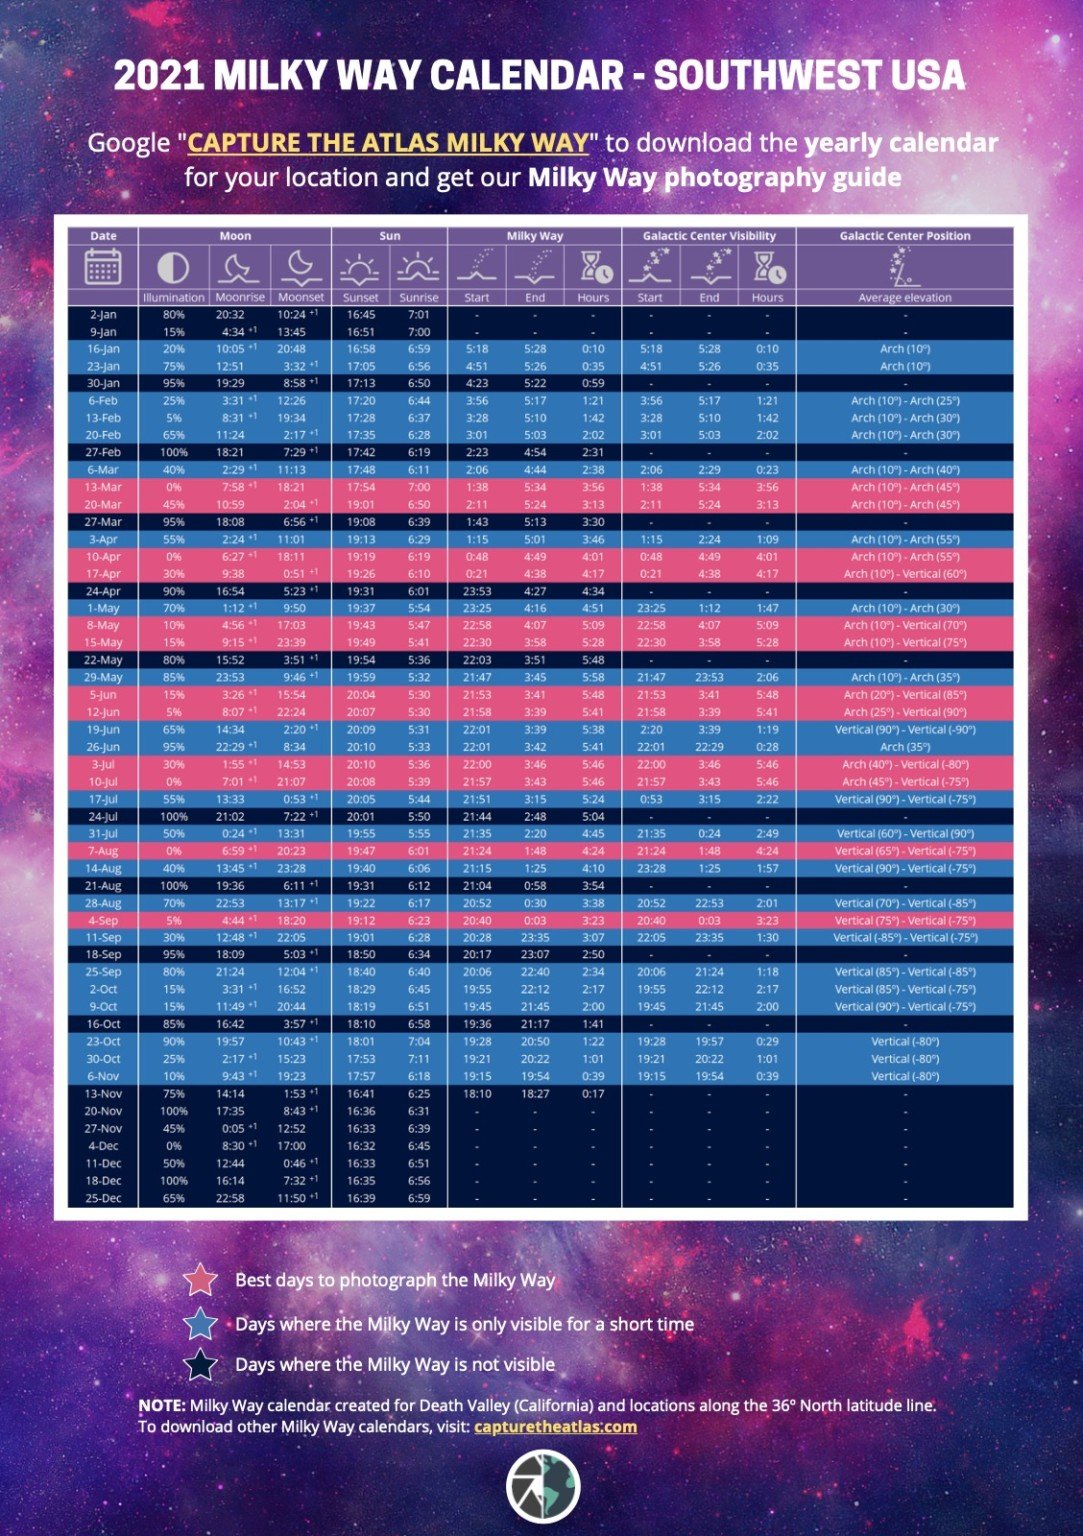 Use This Astro Calendar to Plan Your Milky Way Shots This Year | PetaPixel